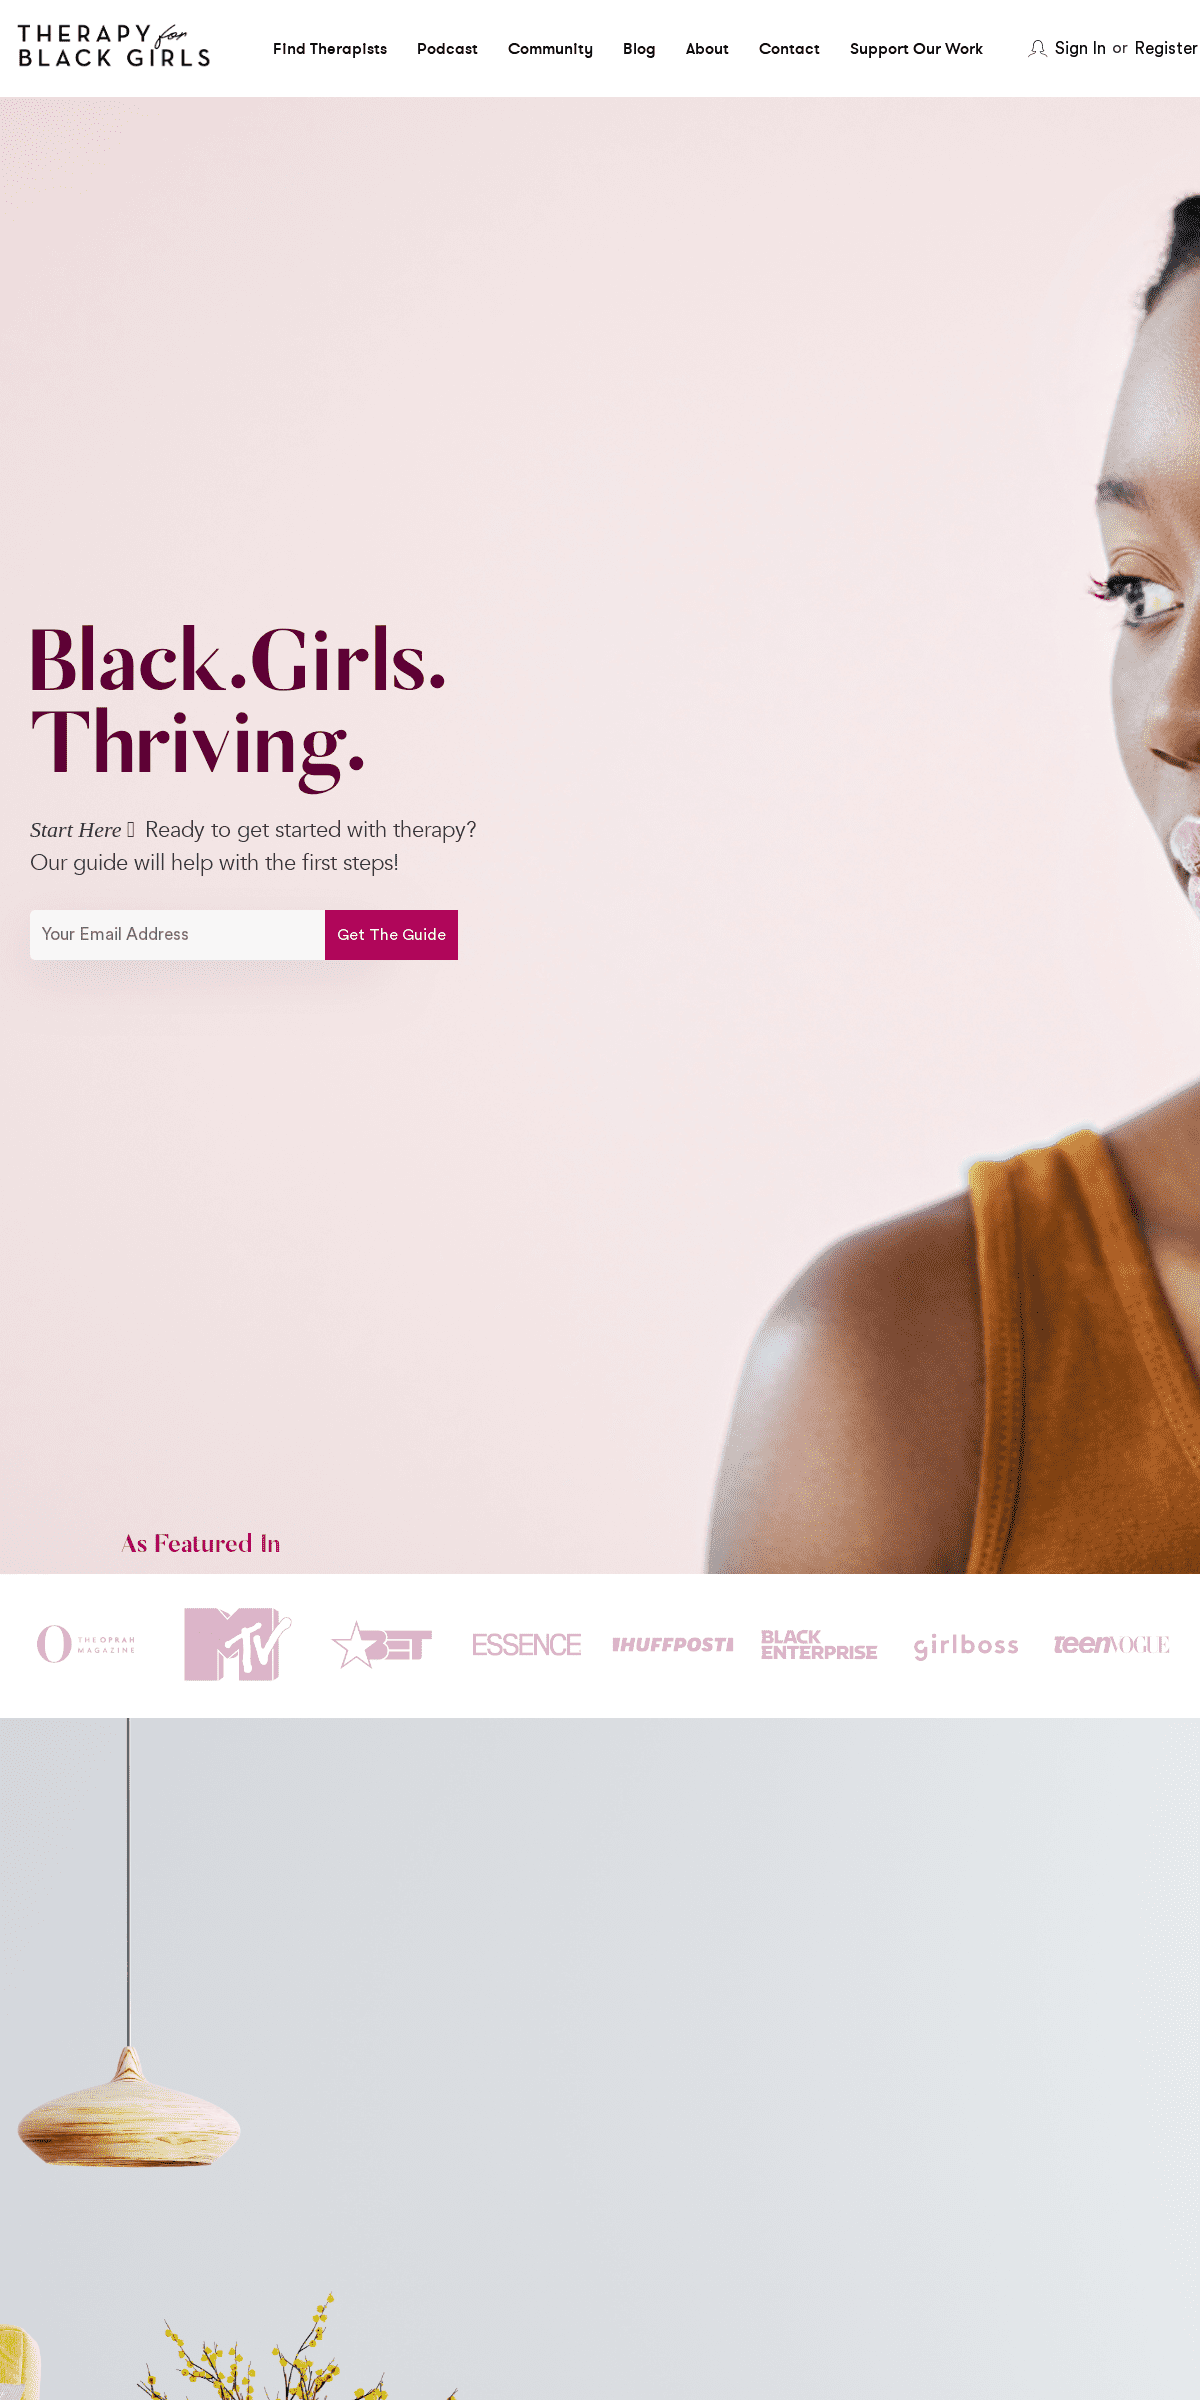 A complete backup of therapyforblackgirls.com